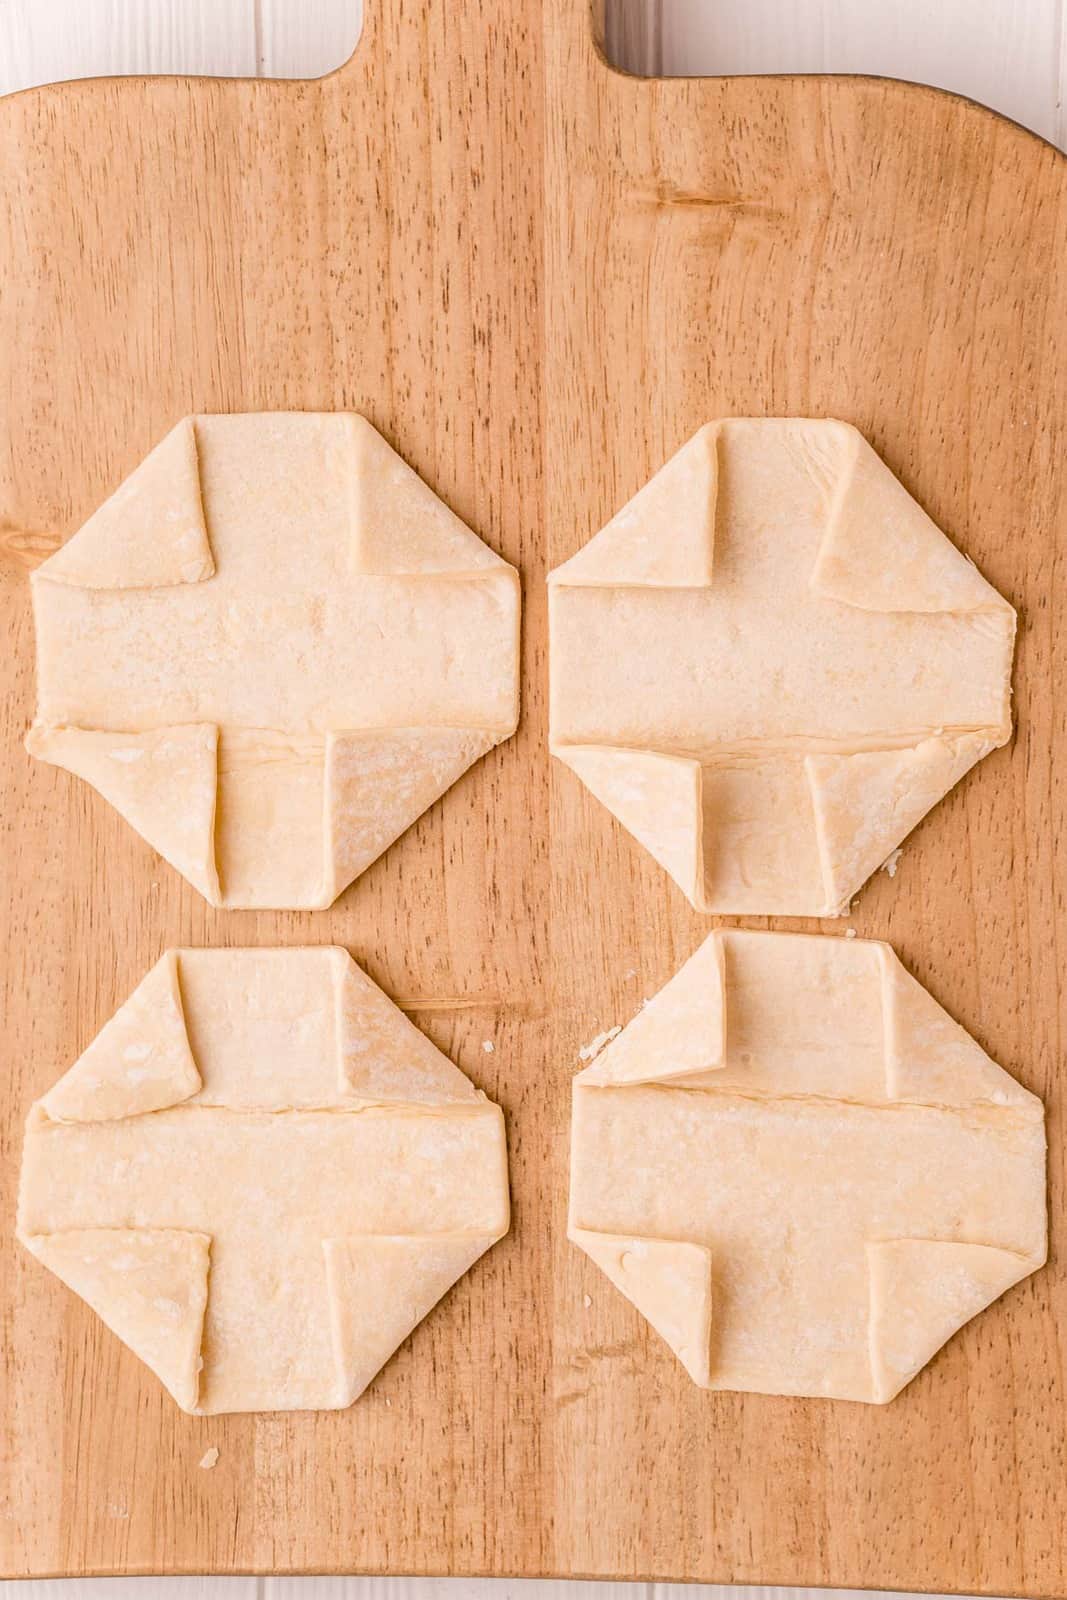 Puff pastry squares with edges folded in on wooden cutting board